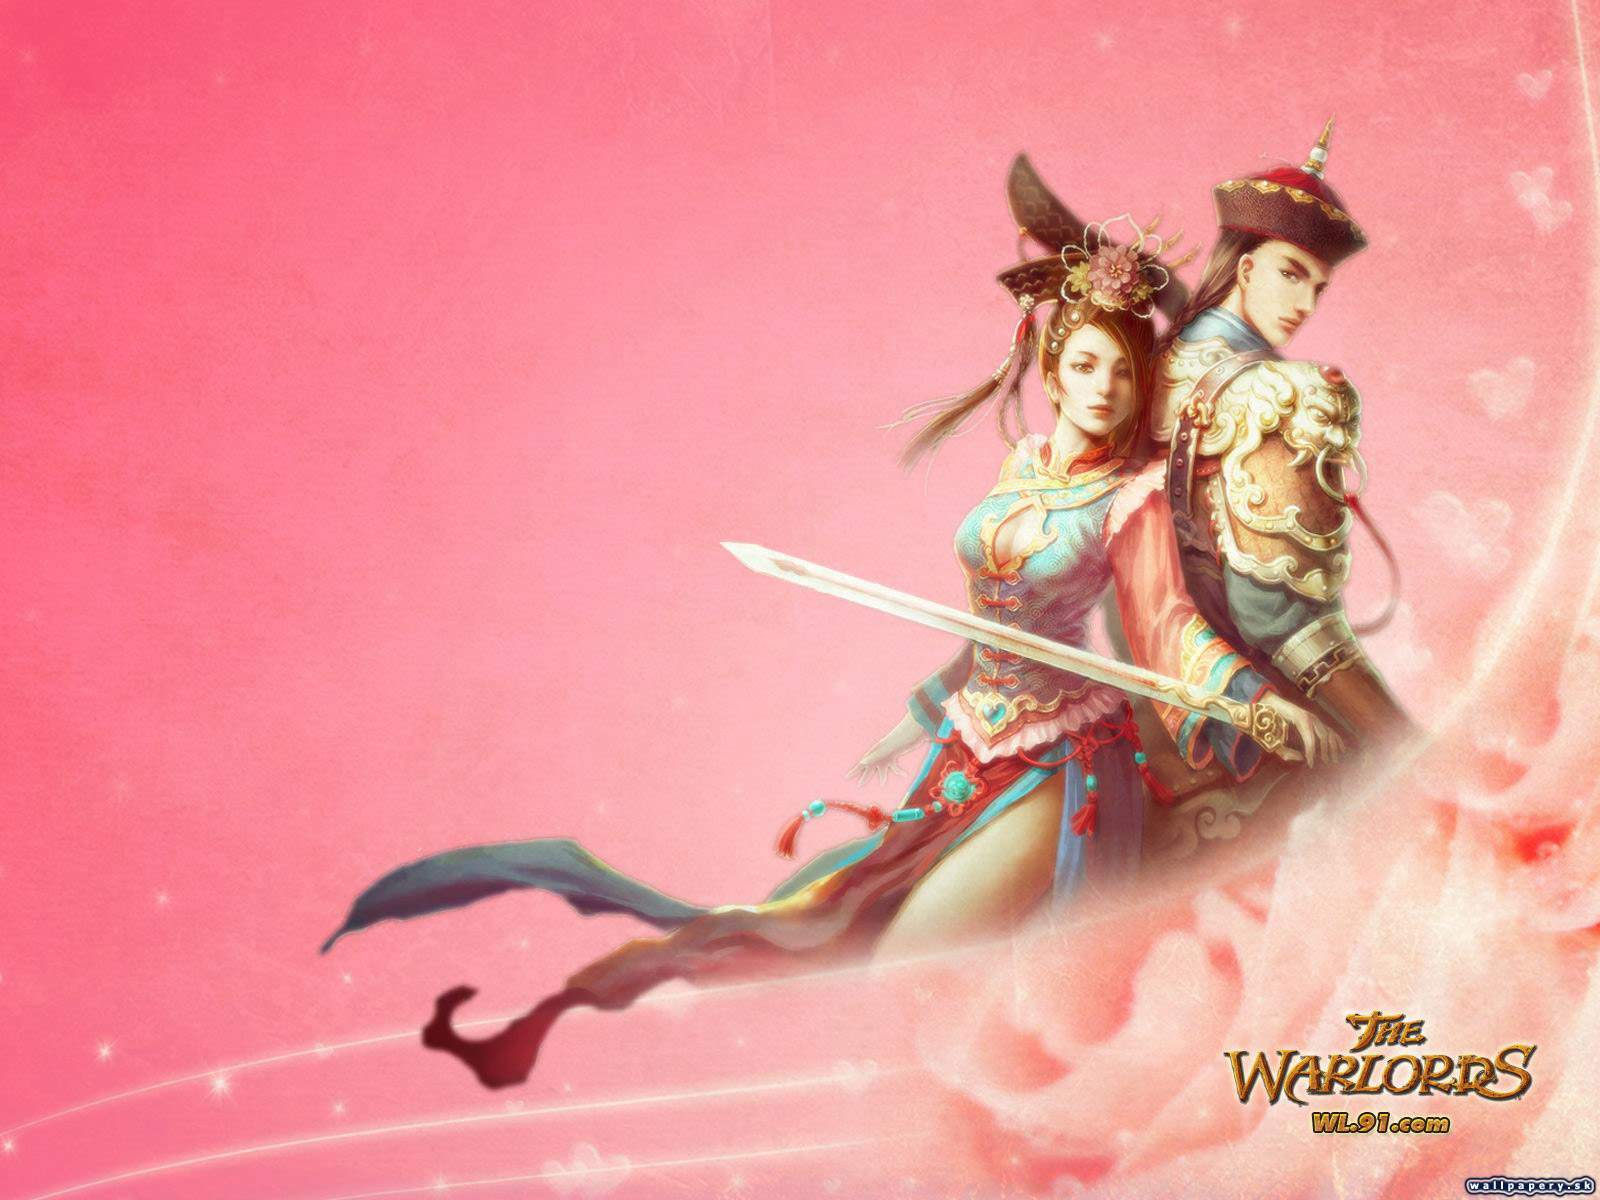 The Warlords - wallpaper 4